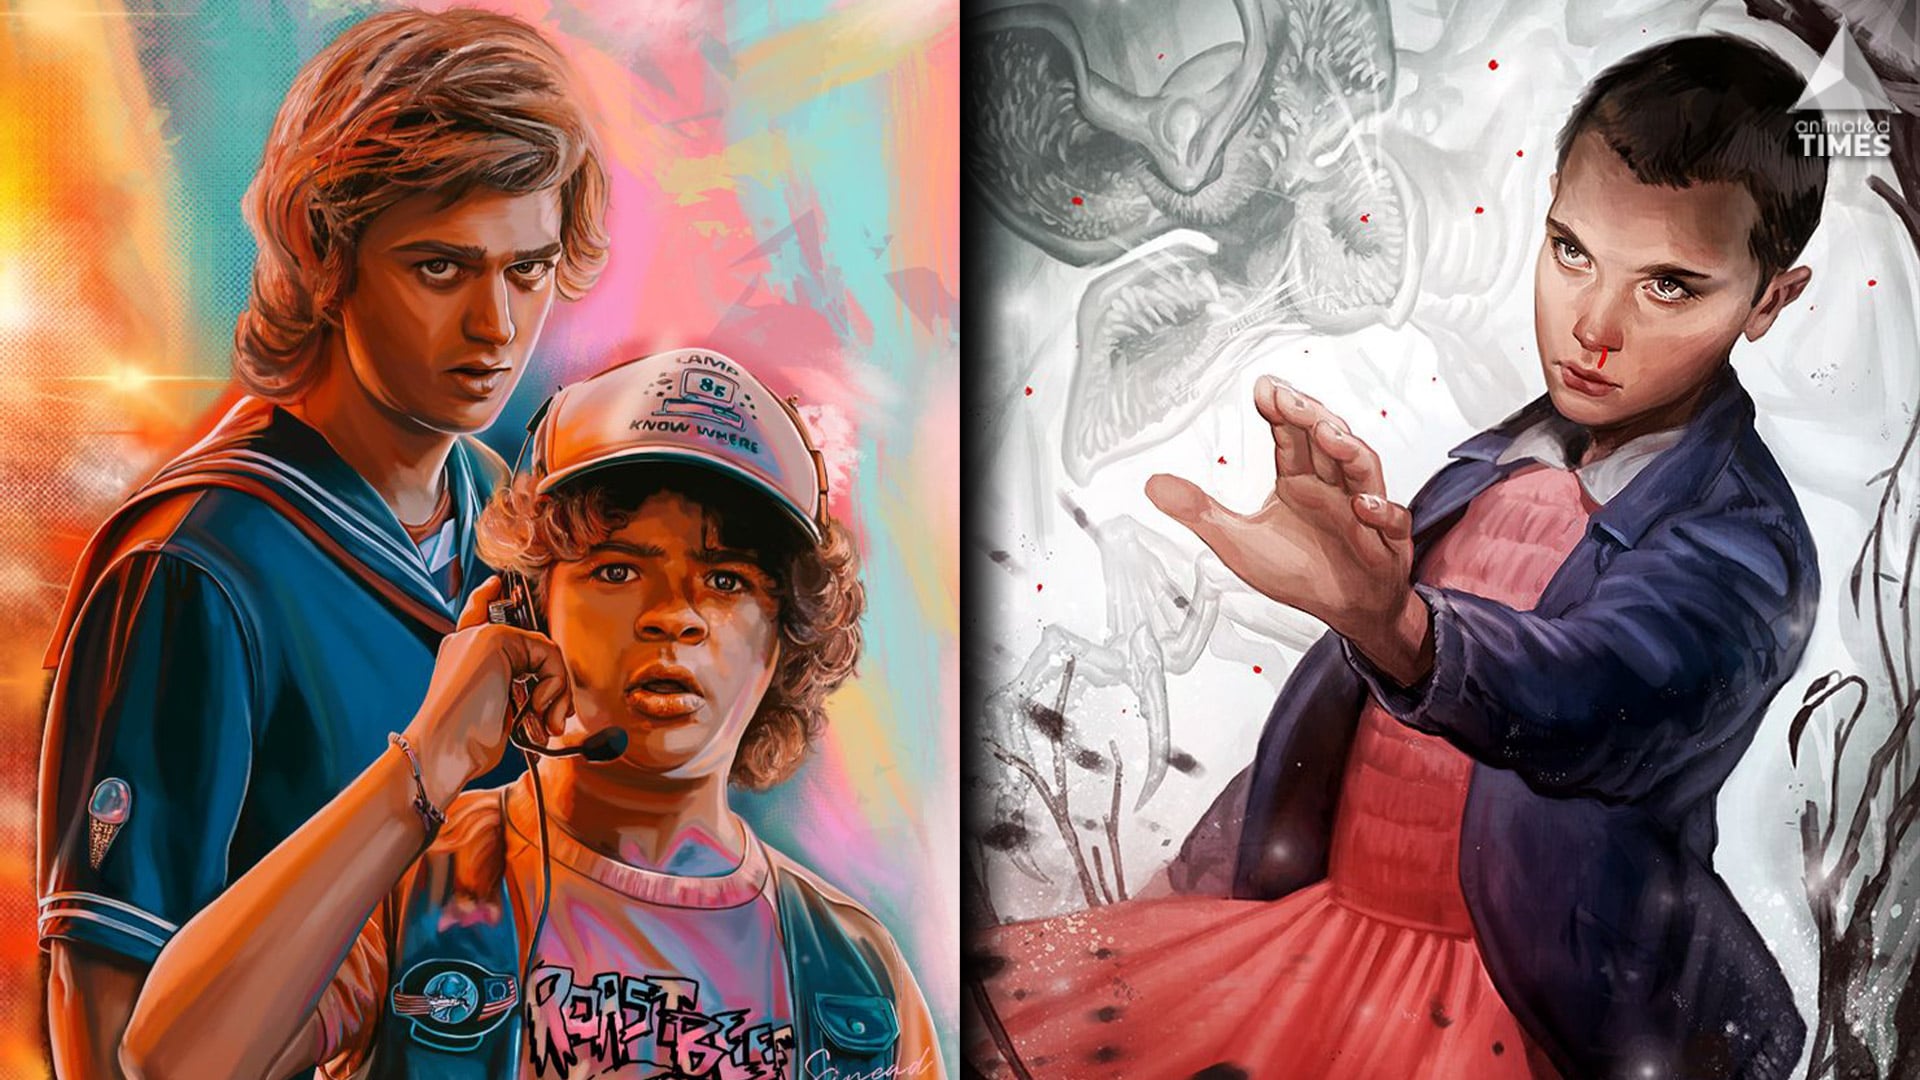 10 Stunning Pieces Of The Stranger Things Fan Art That The Fans Might Love